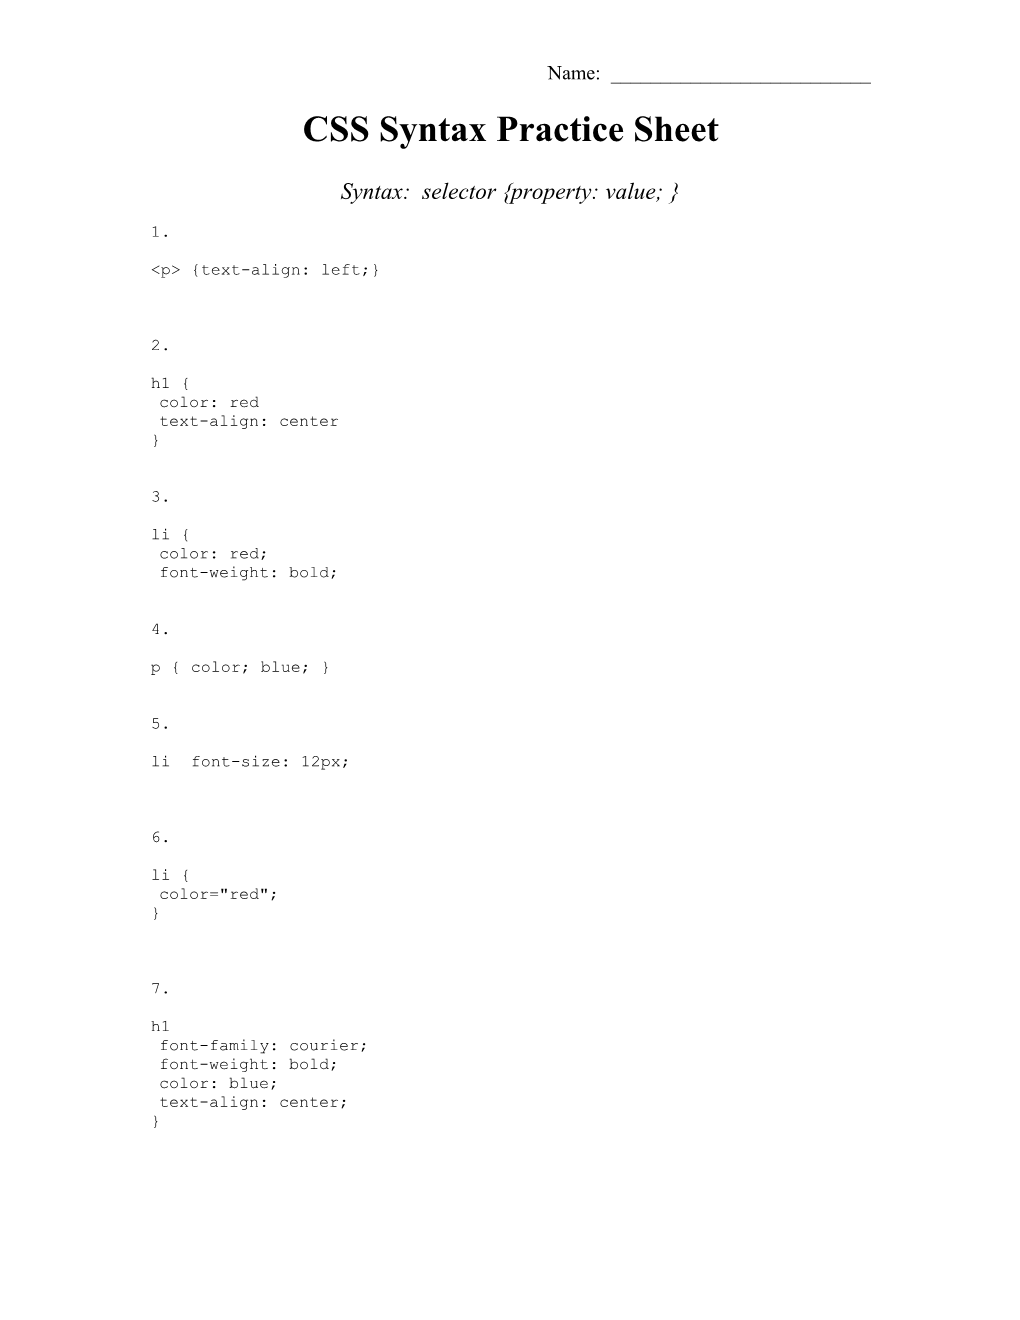 CSS Syntax Practice Sheet